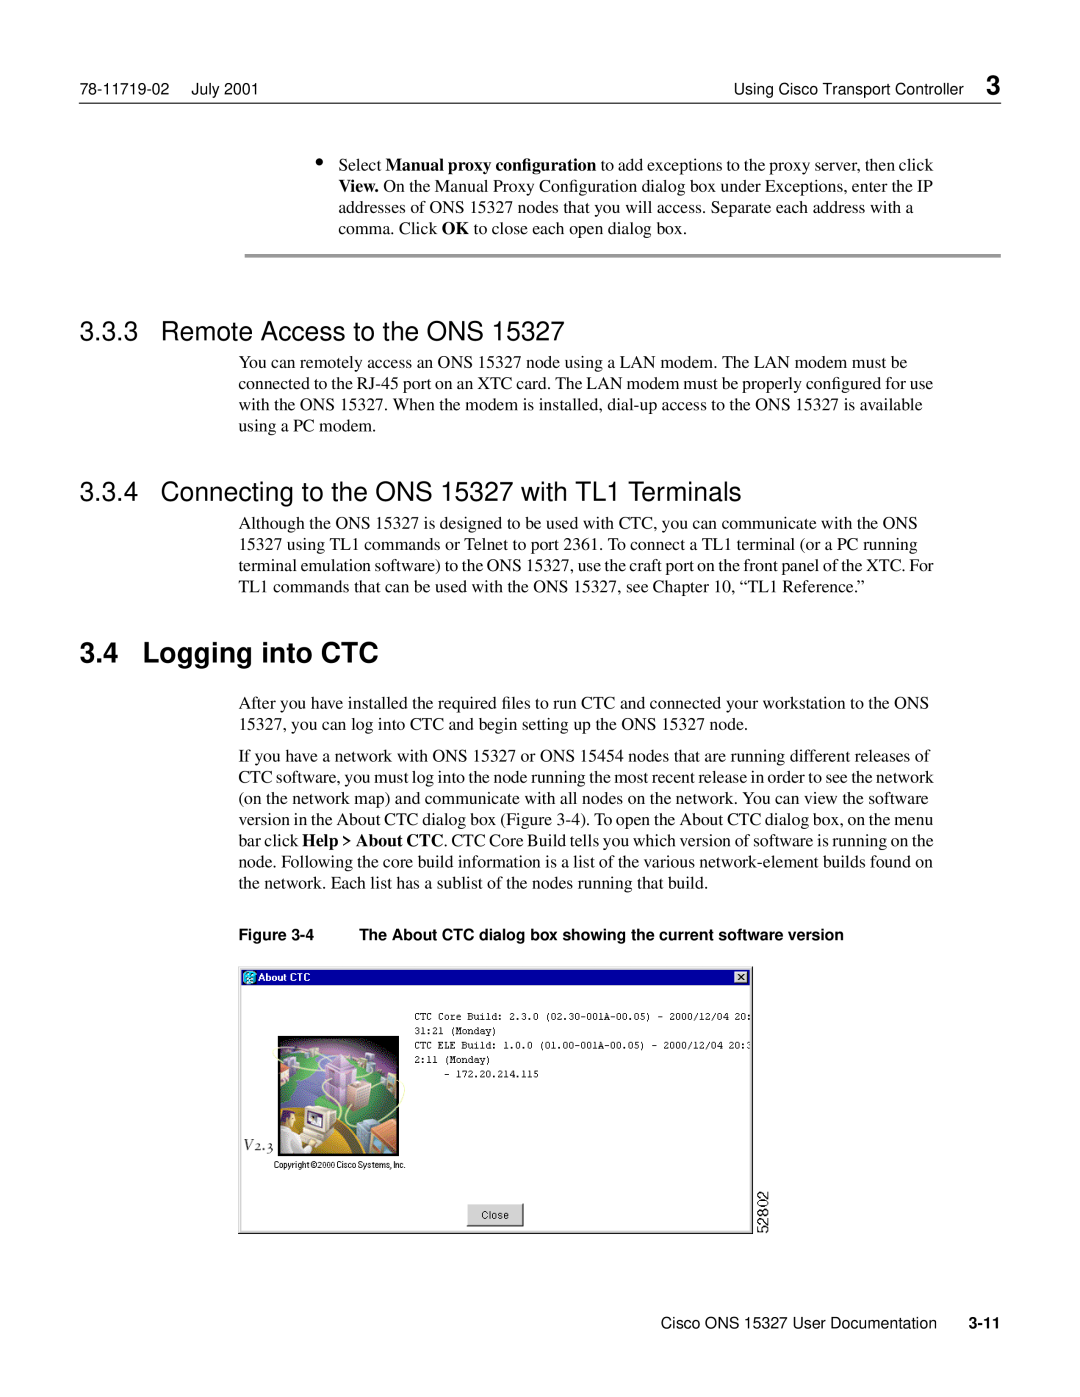 Cisco Systems manual Logging into CTC, Remote Access to the ONS, Connecting to the ONS 15327 with TL1 Terminals 